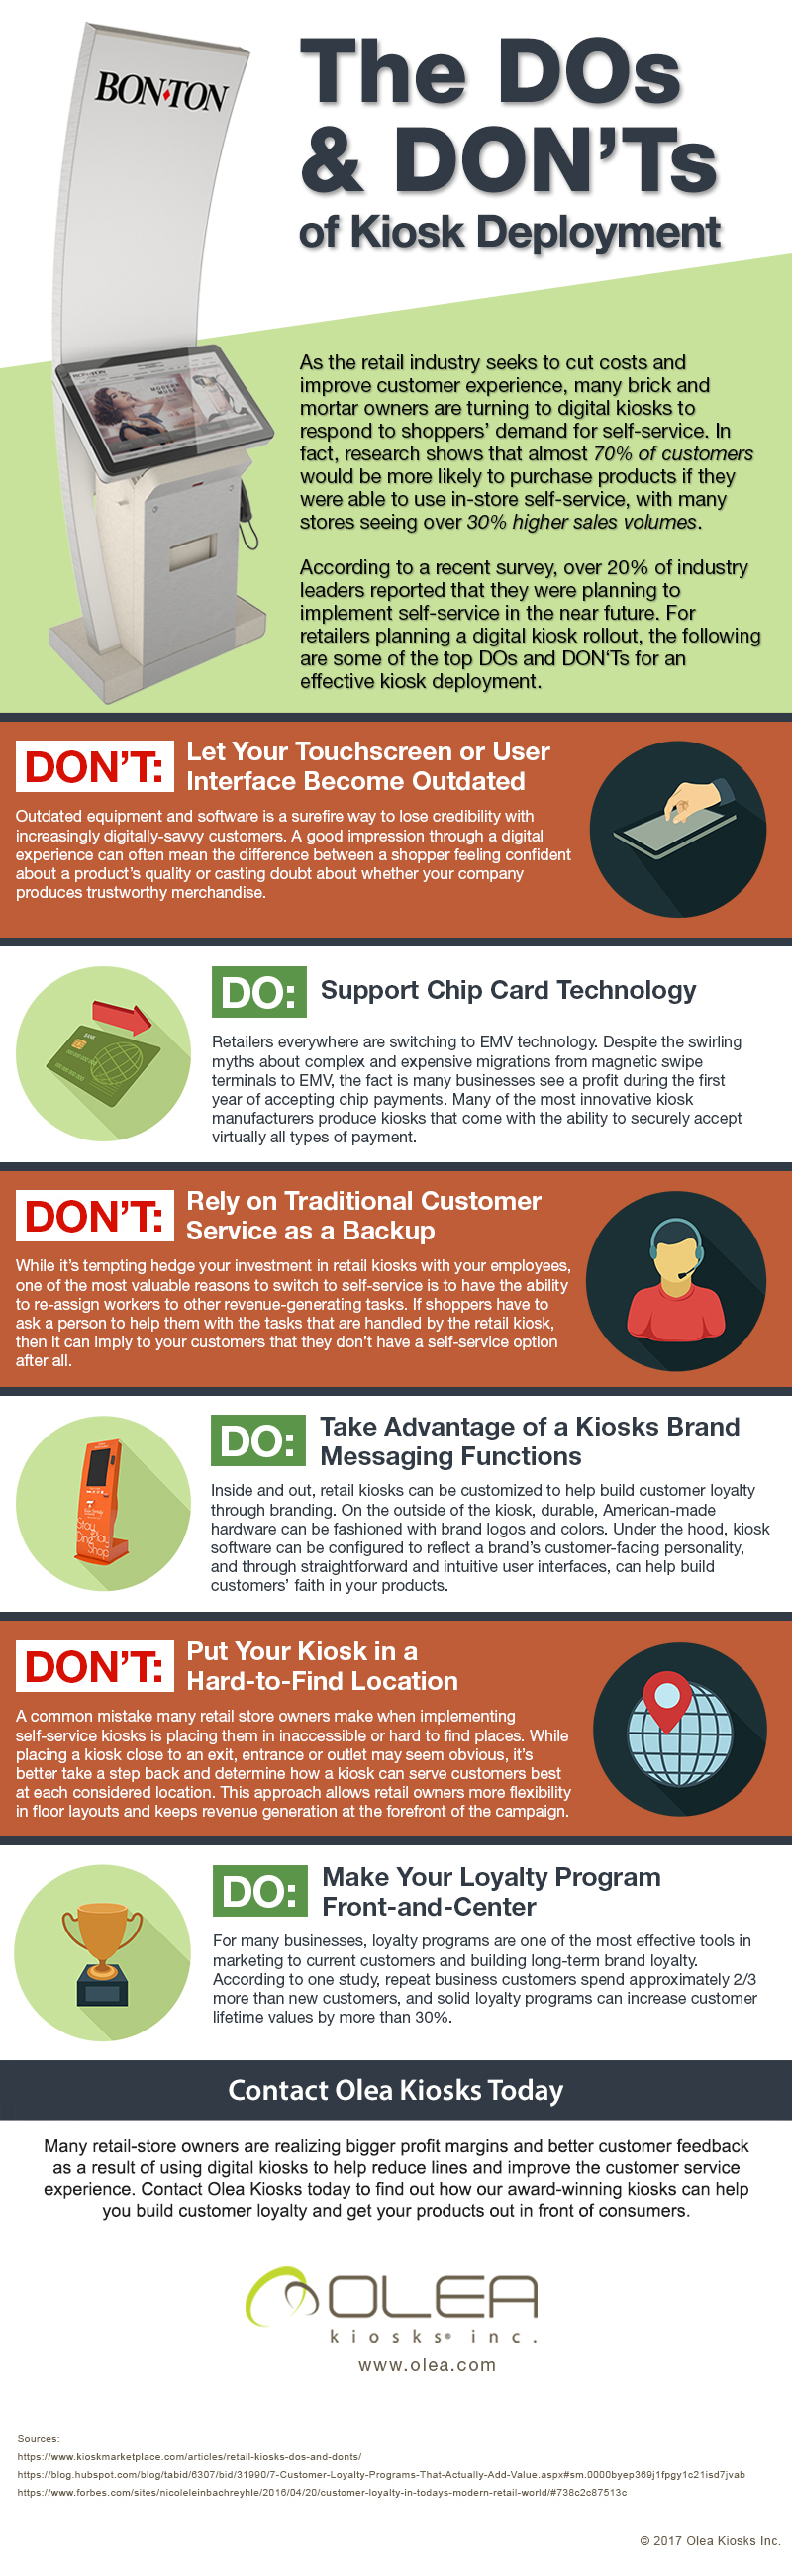 The Do’s and Don’ts of Retail Kiosk Implementation